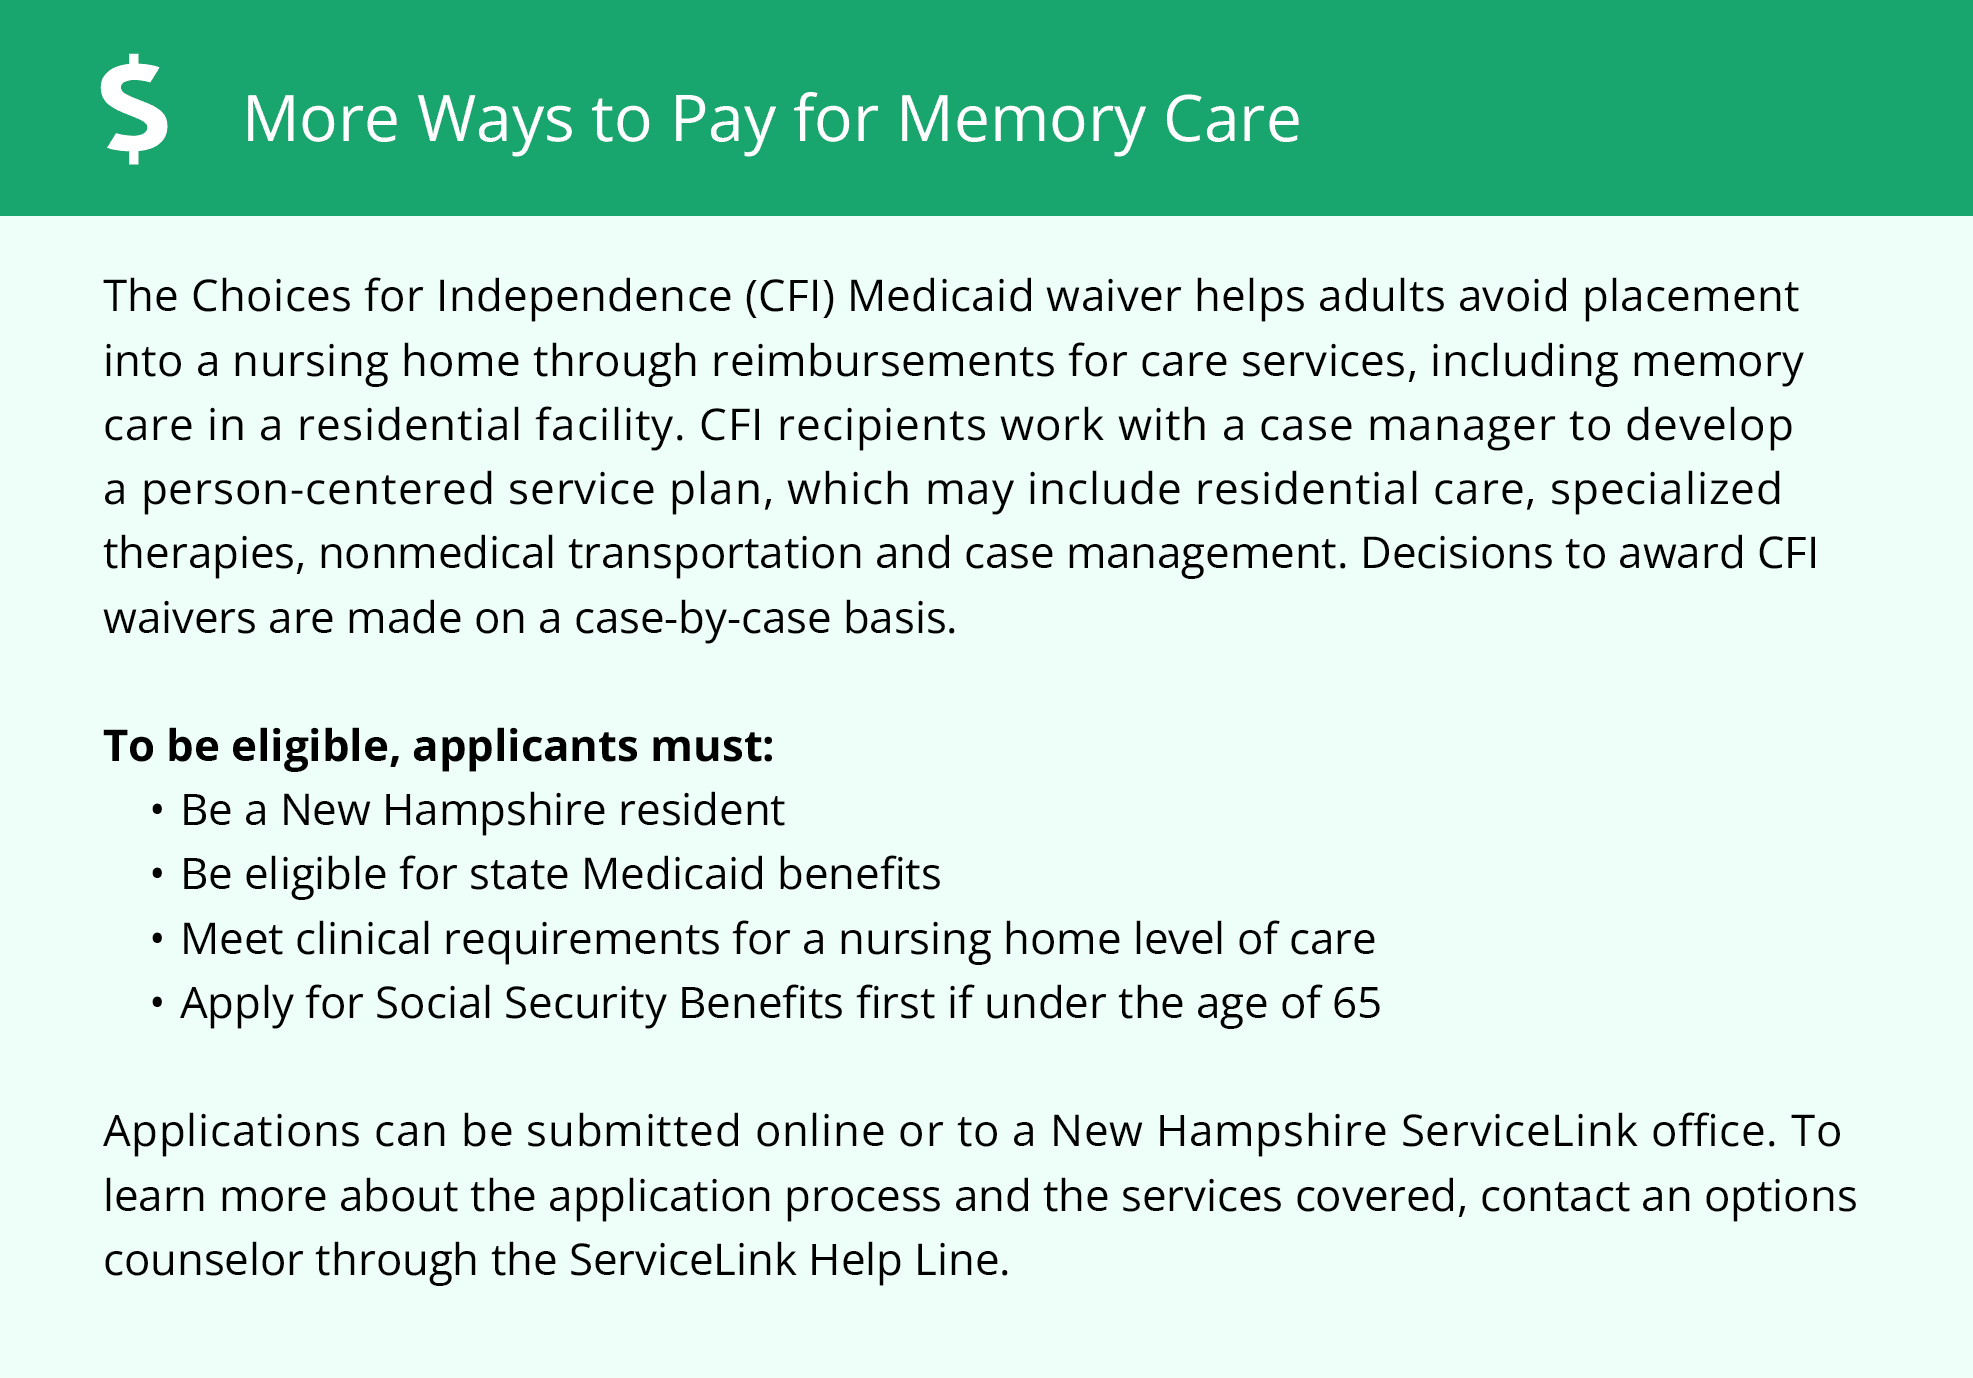 Financial Assistance for Memory Care in New Hampshire